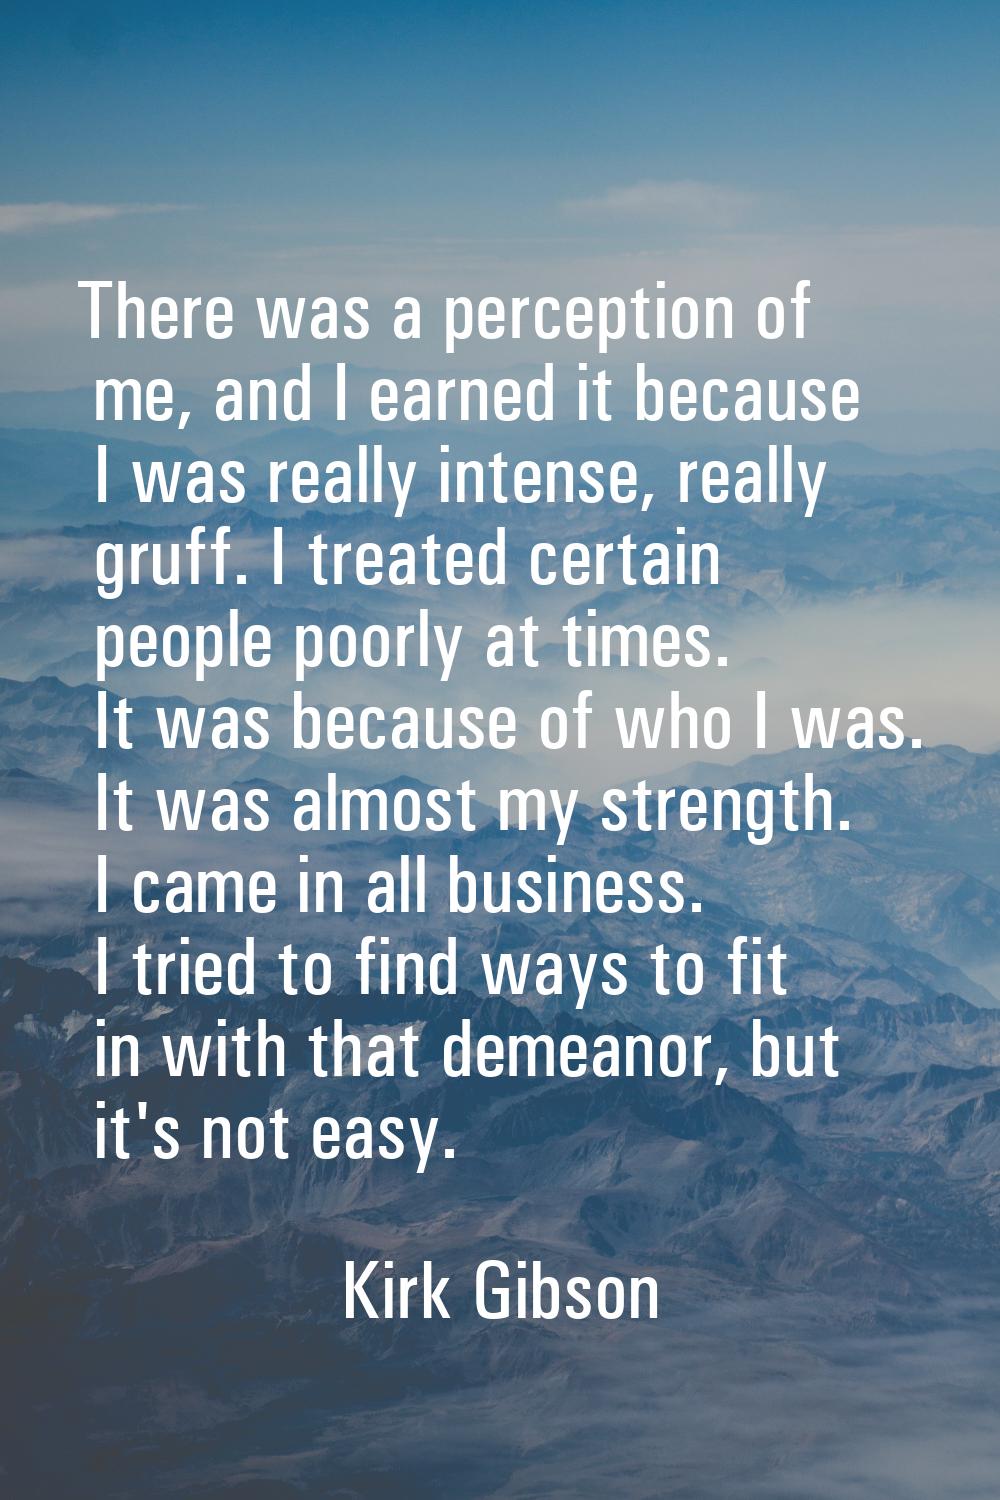 There was a perception of me, and I earned it because I was really intense, really gruff. I treated